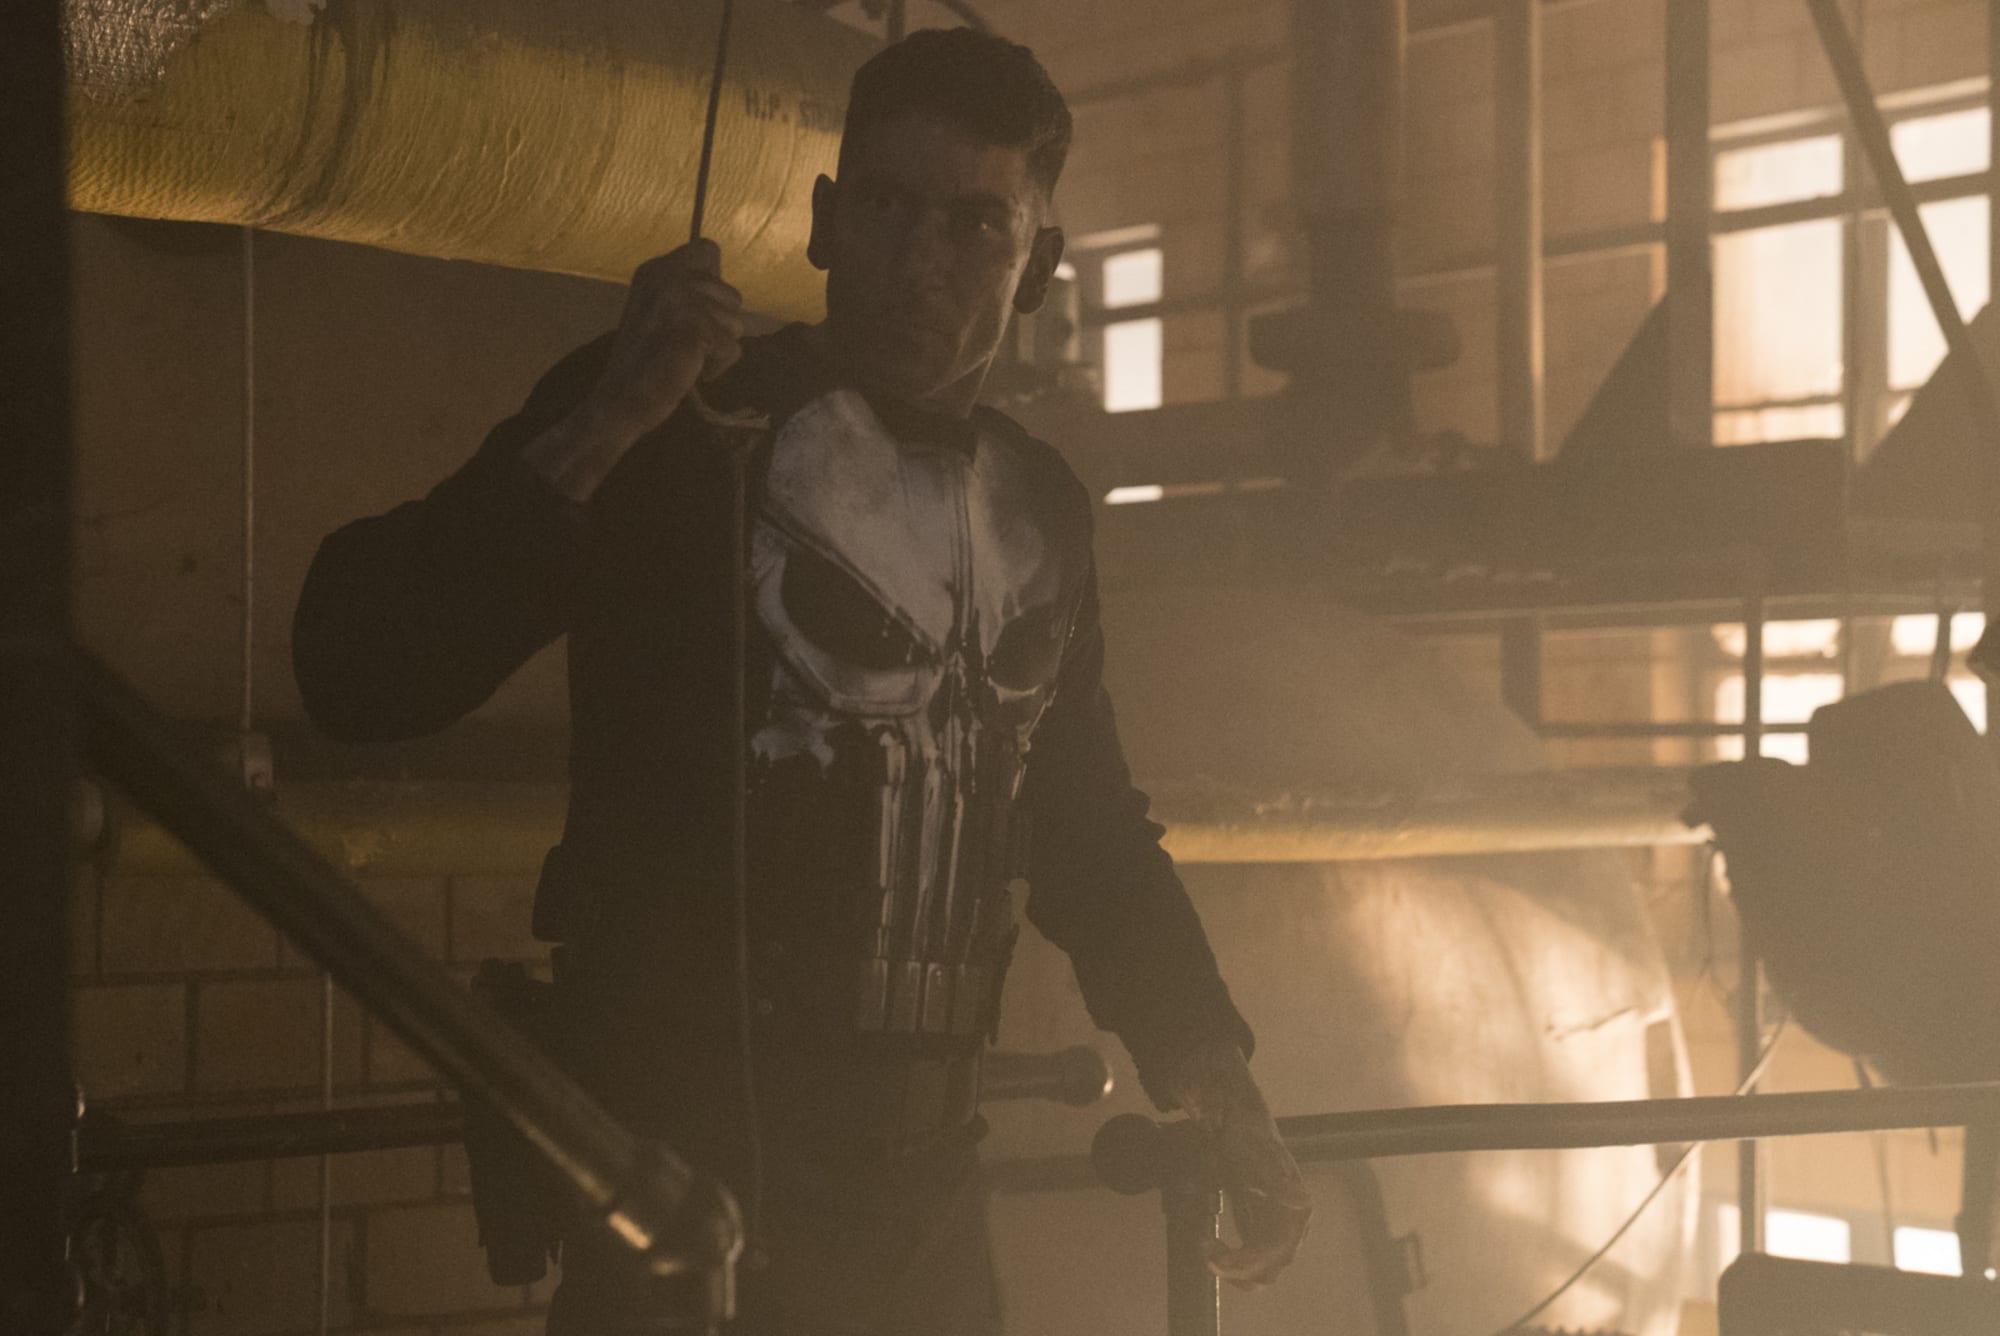 Marvel Comics' Punisher offers a new look at Frank Castle